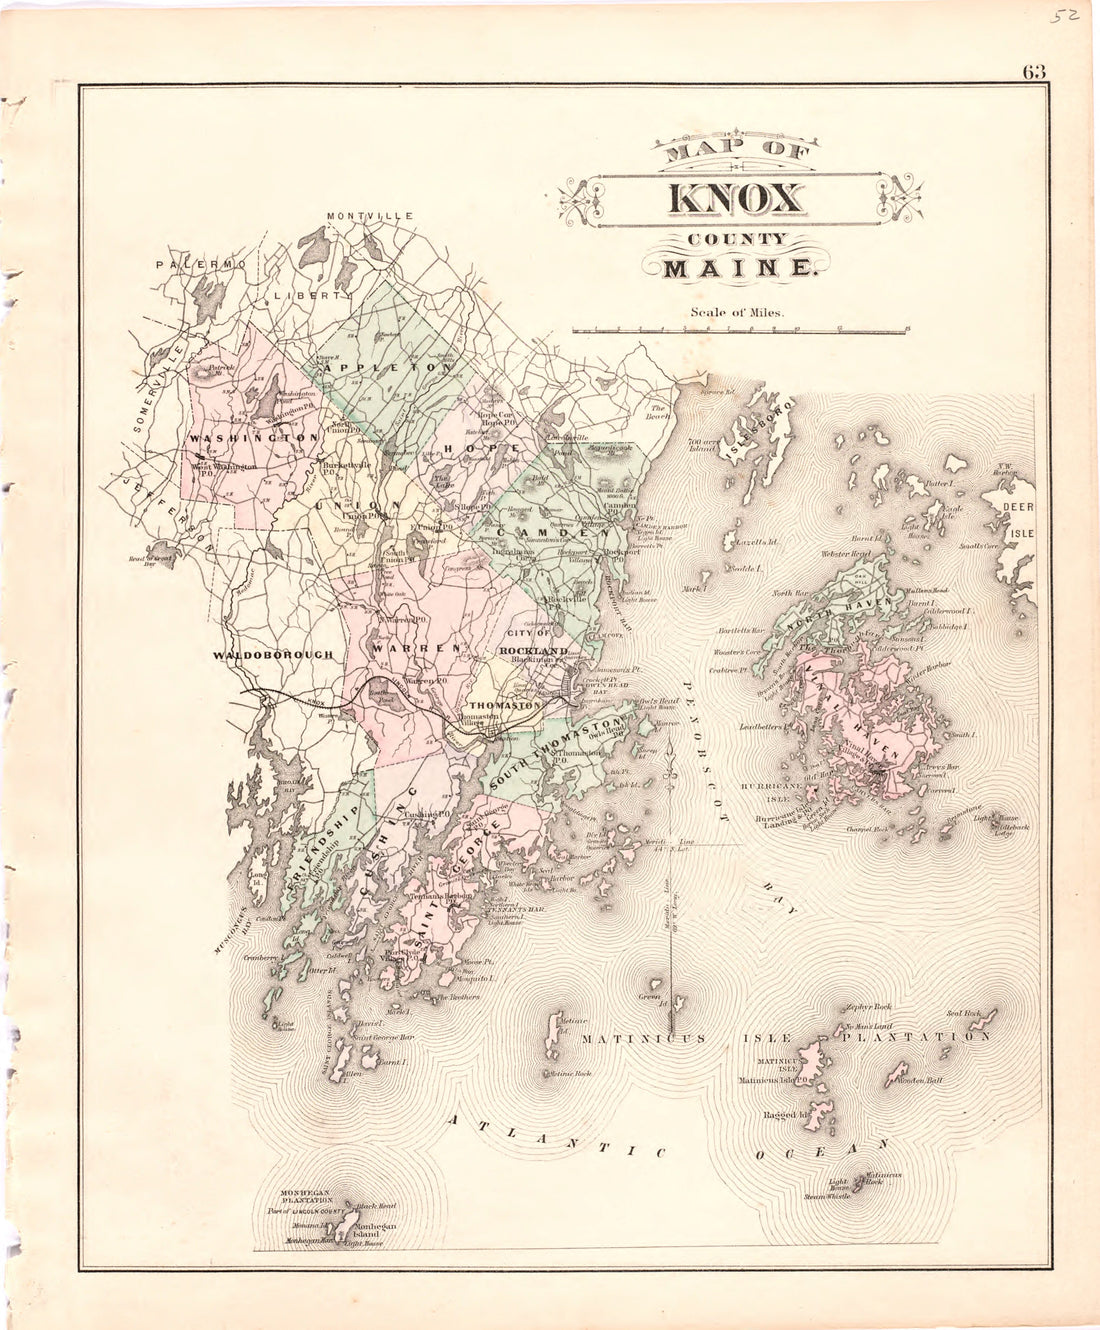 This hand drawn illustration (map) of Map of Knox County Maine from Colby&